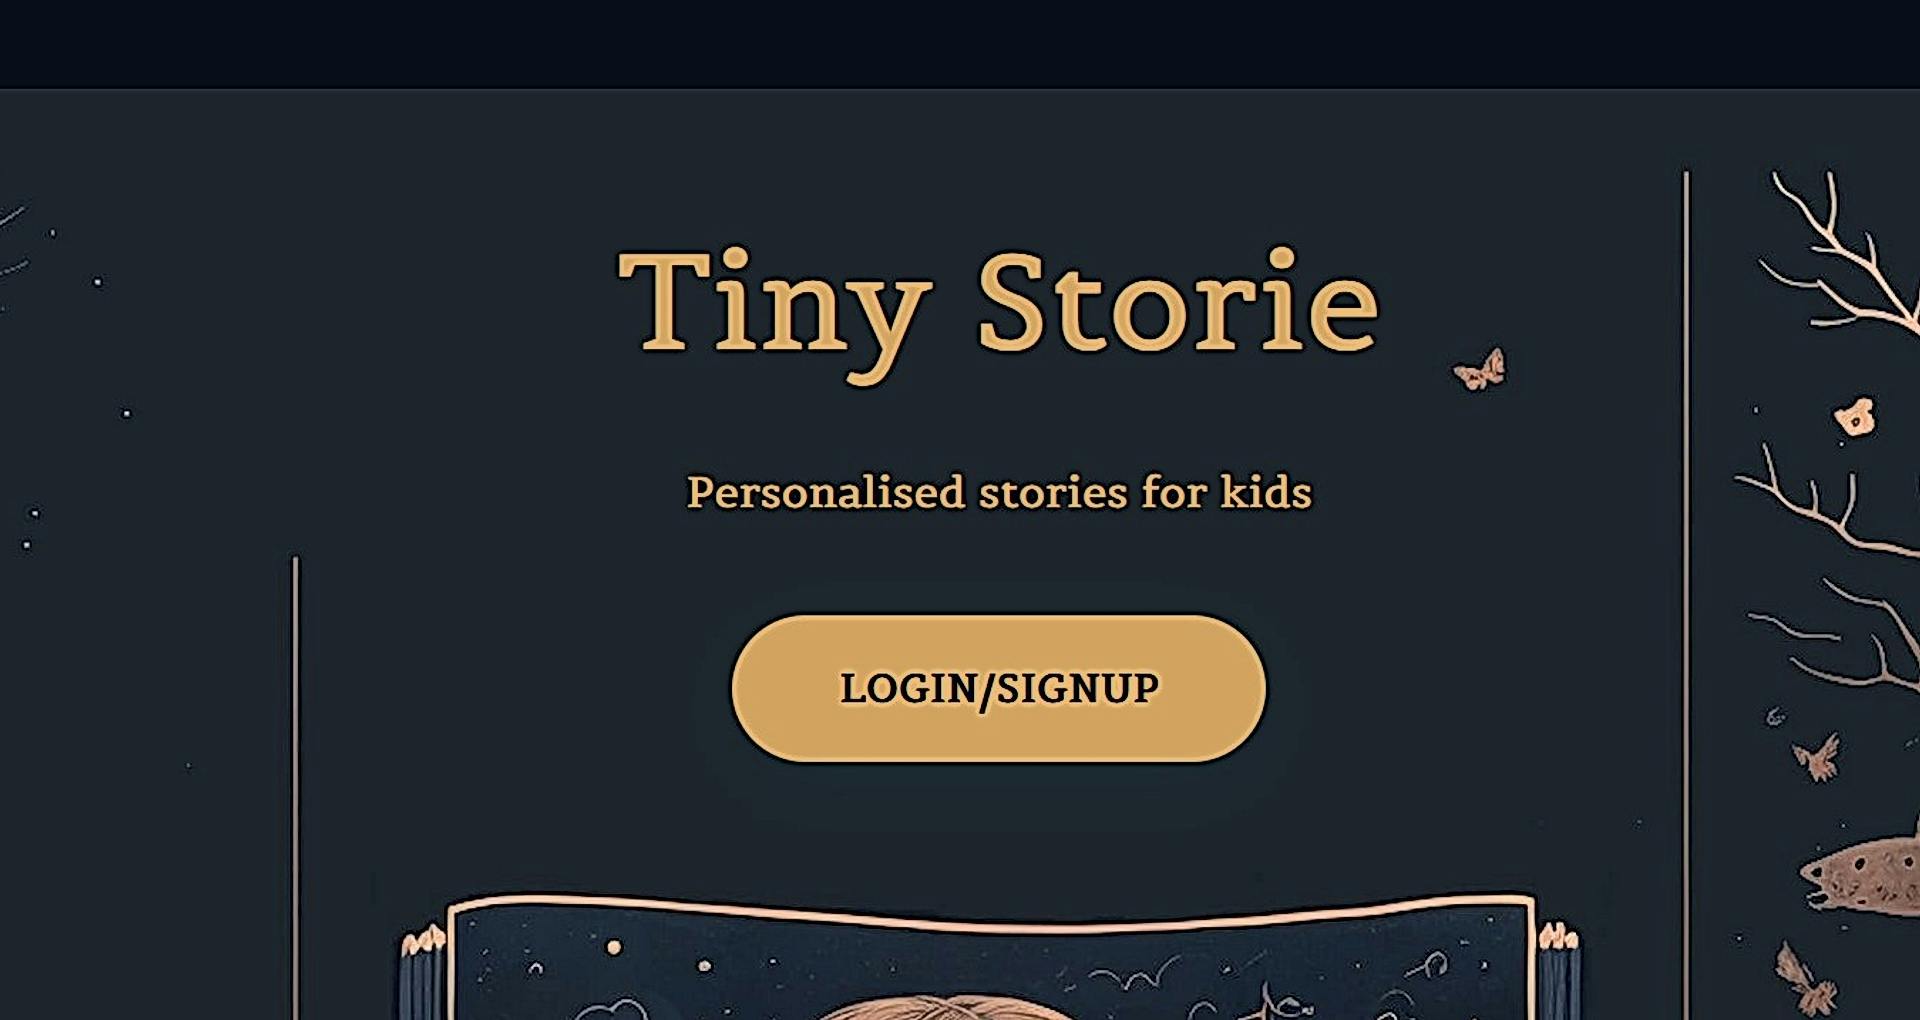 Tiny storie featured